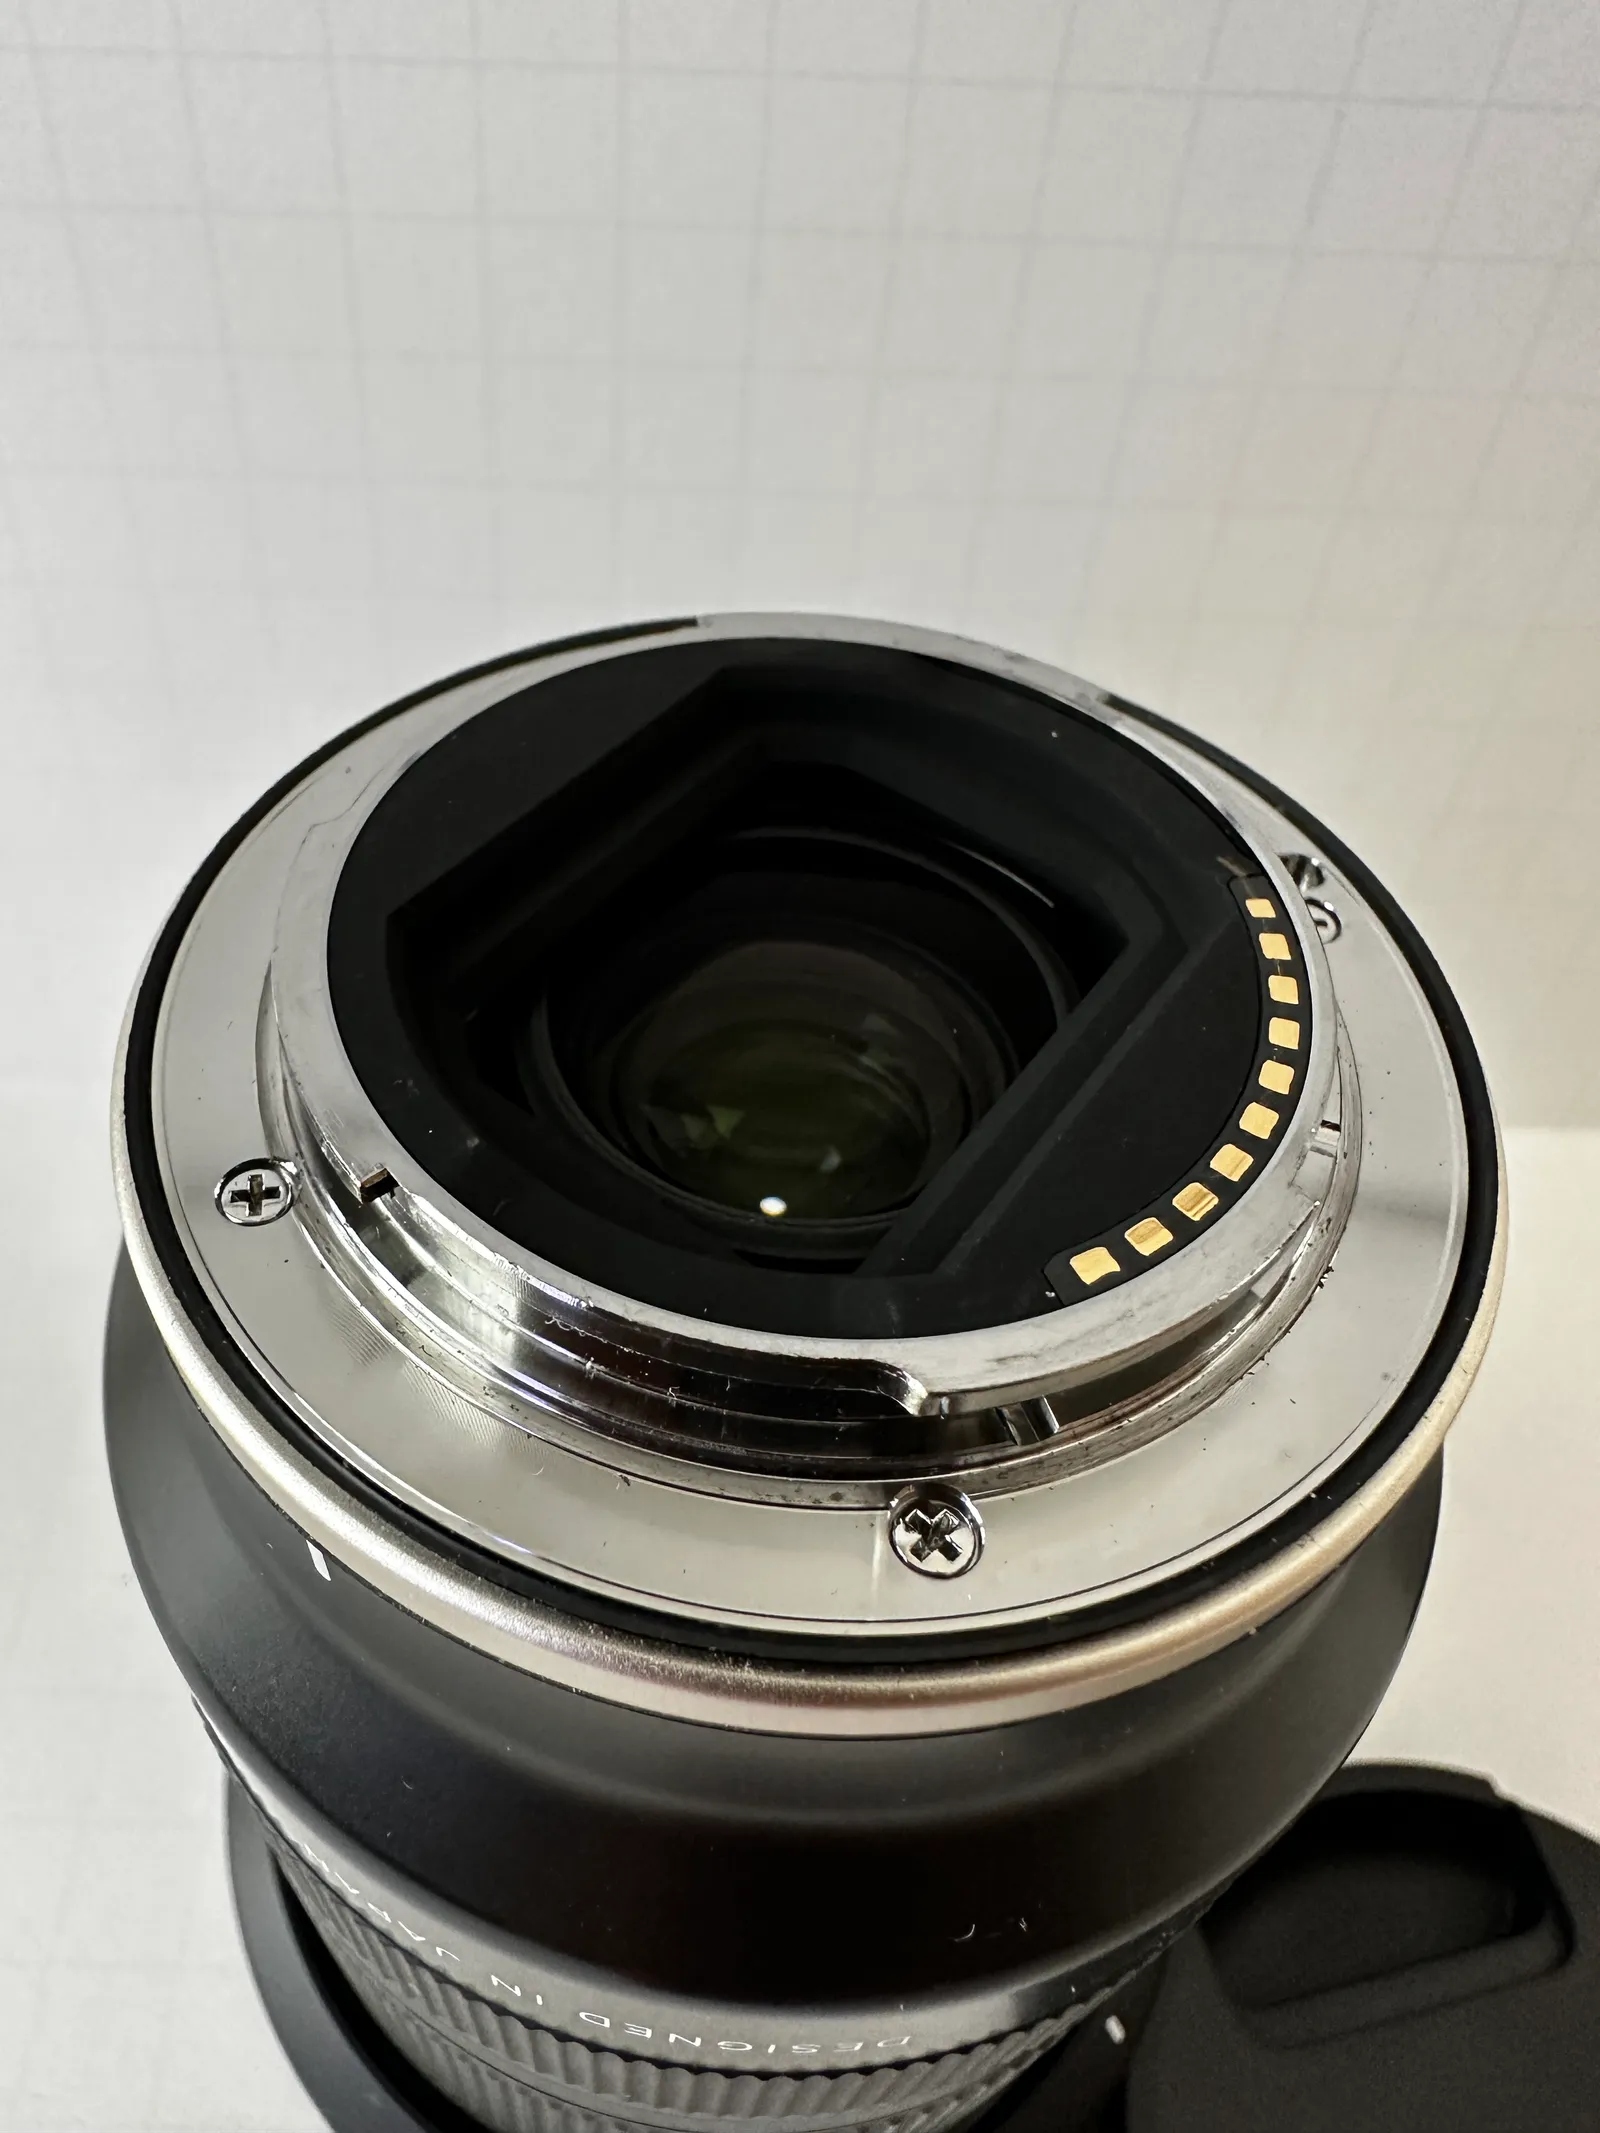 Tamron 17-28mm f/2.8 Di III RXD for Sony Mirrorless Full Frame/APS-C E  Mount From Asa's G...